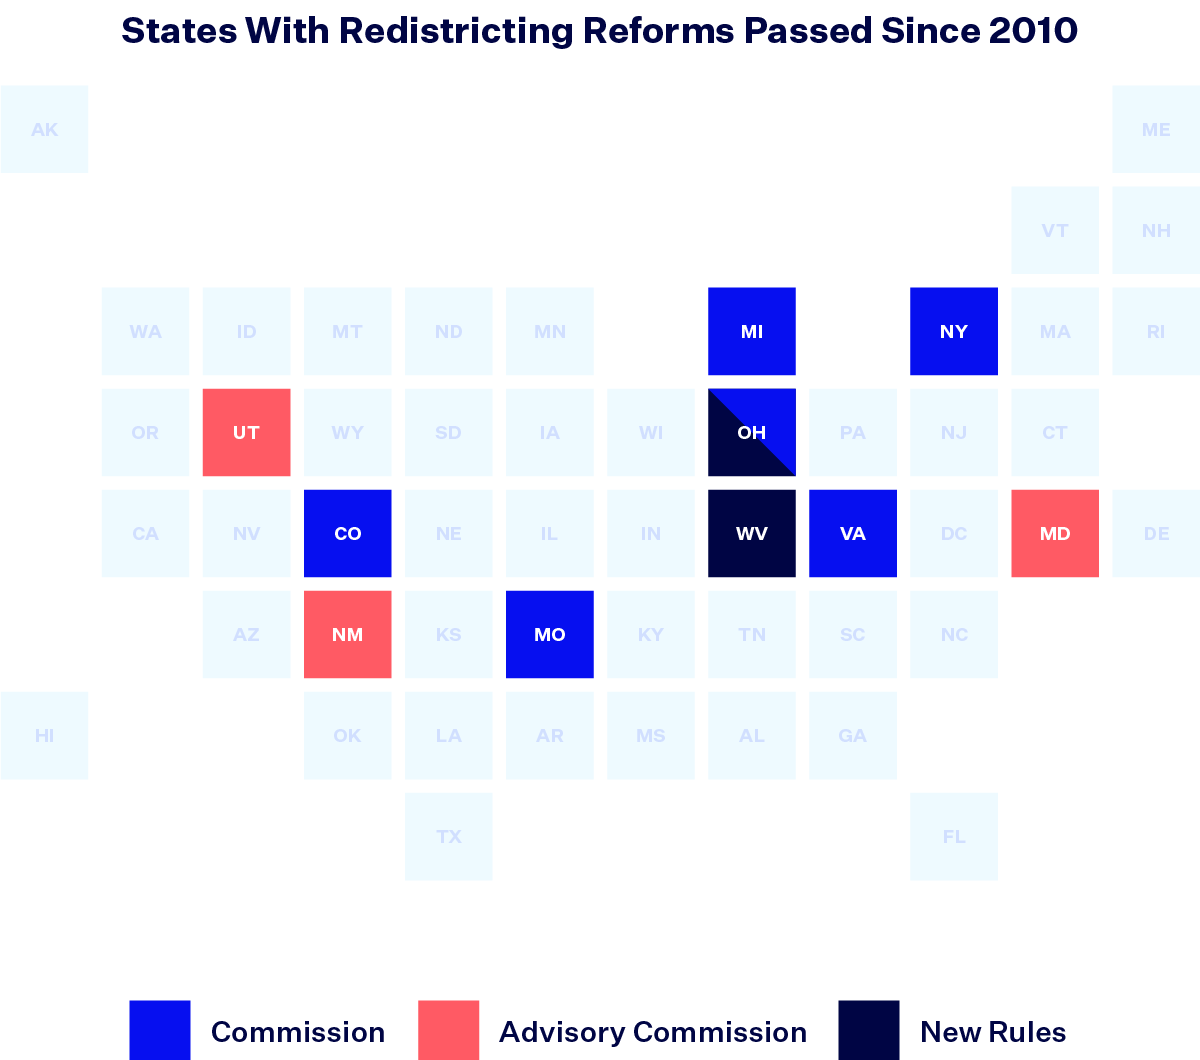 Map graphic titled "States With Redistricting Reforms Passed Since 2010." Dark blue states with a Commission (NY, MI, VA, CO, MO); bright pink states with  Advisory Commission (MD, NM, UT); navy blue states with New Rules (WV). OH is split half and half navy blue and bright blue signaling both a Commission and New Rules.